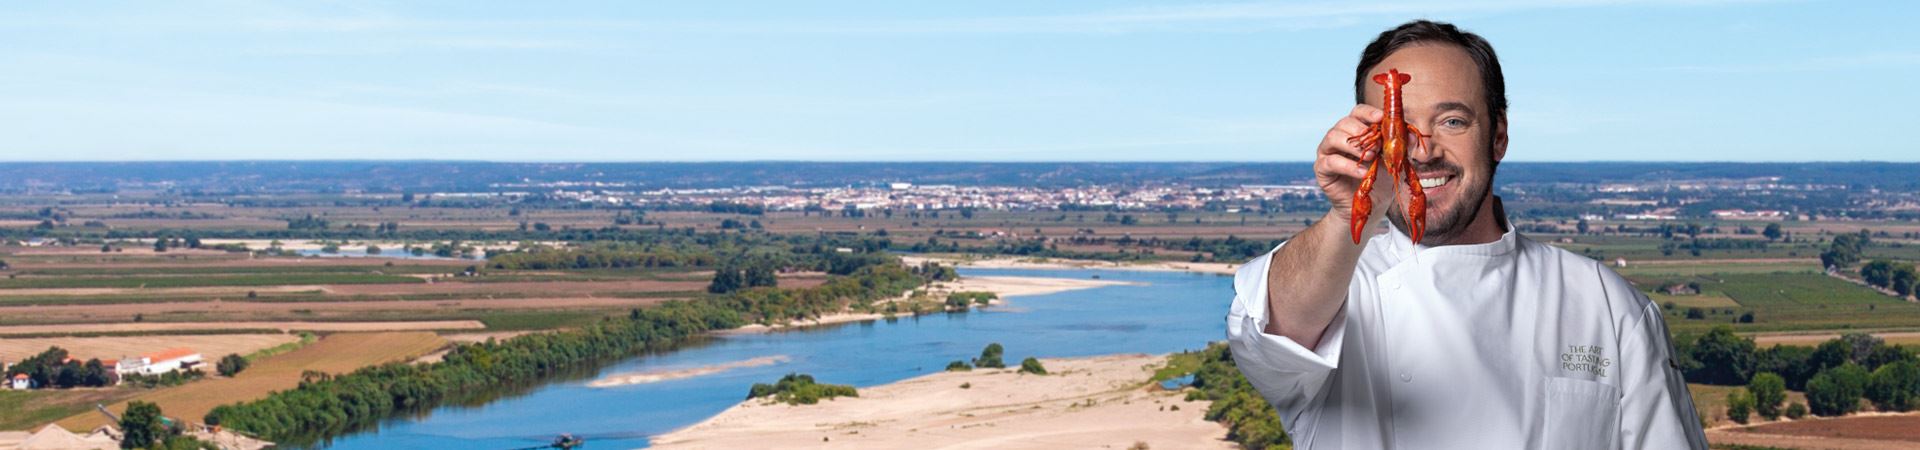 Panoramic photograph of a landscape in the Lezíria do Tejo region, showing a river, with sand and vegetation around it, a plain and vegetation, and in the background a village. On the right-hand side, above the photograph, is Chef Rodrigo Castelo, who holds a river crayfish in his left hand, which partially covers the right half of his face.